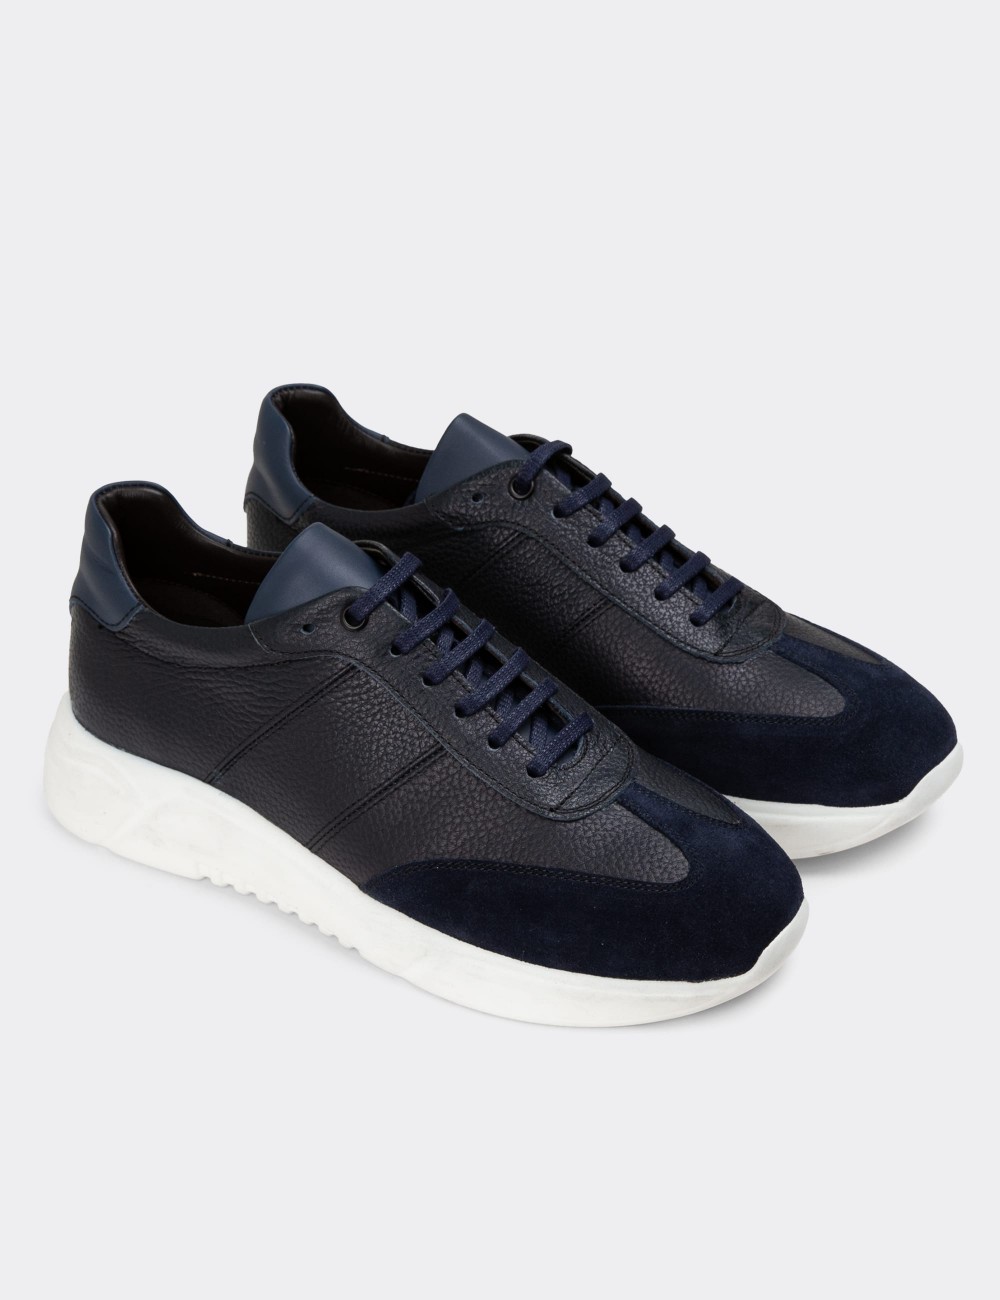 Navy Leather Sneakers - 01961MLCVP01